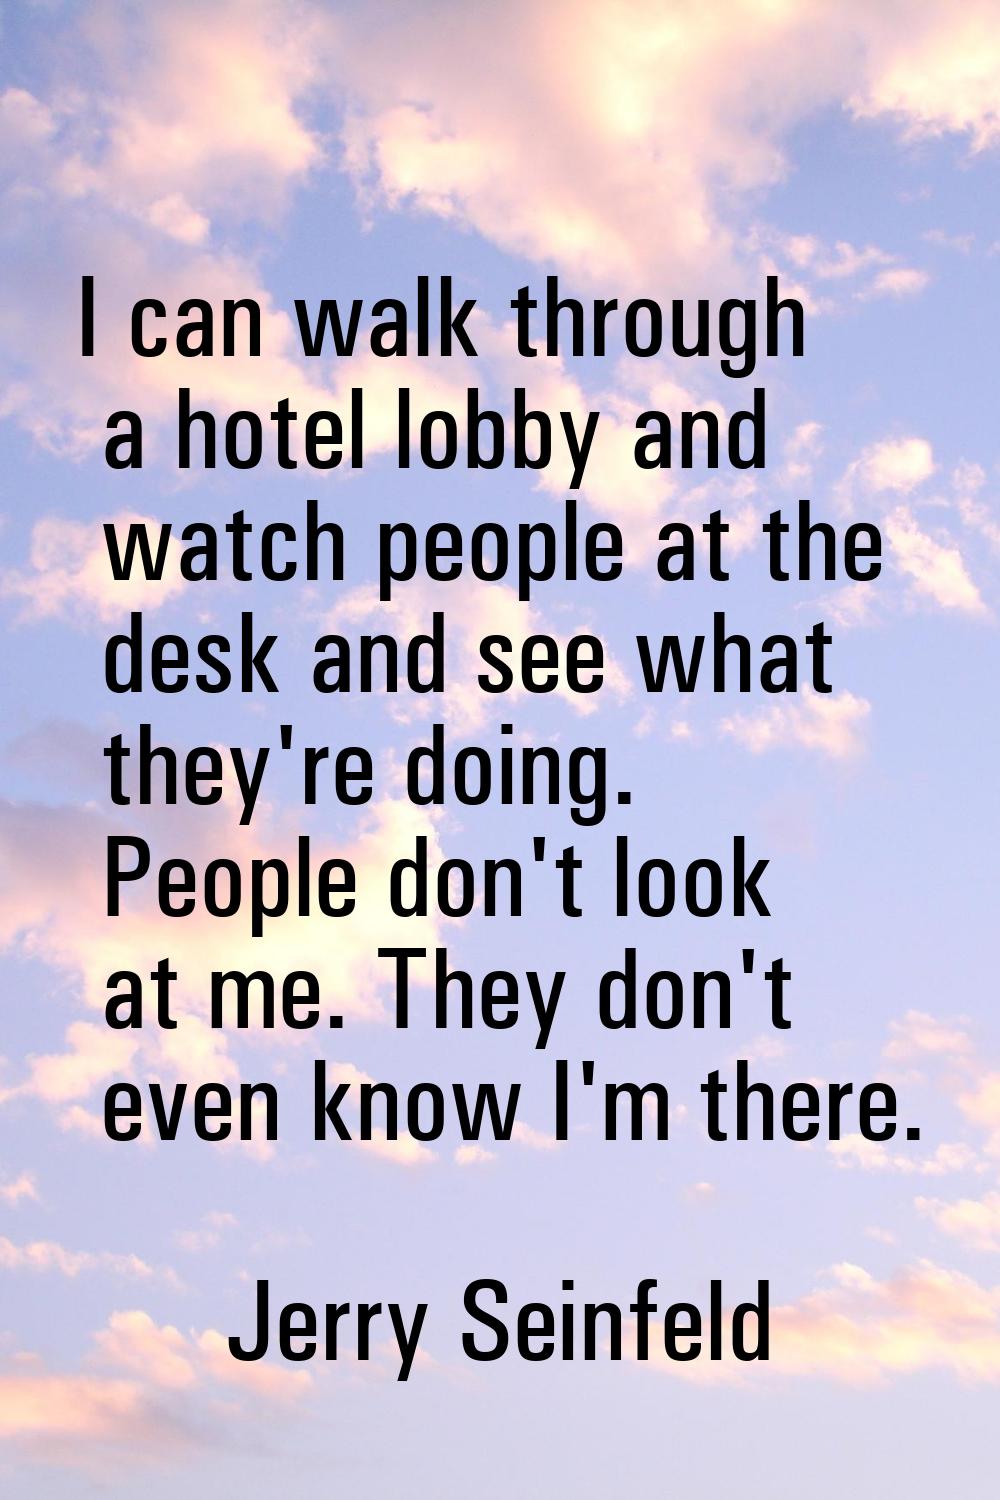 I can walk through a hotel lobby and watch people at the desk and see what they're doing. People do